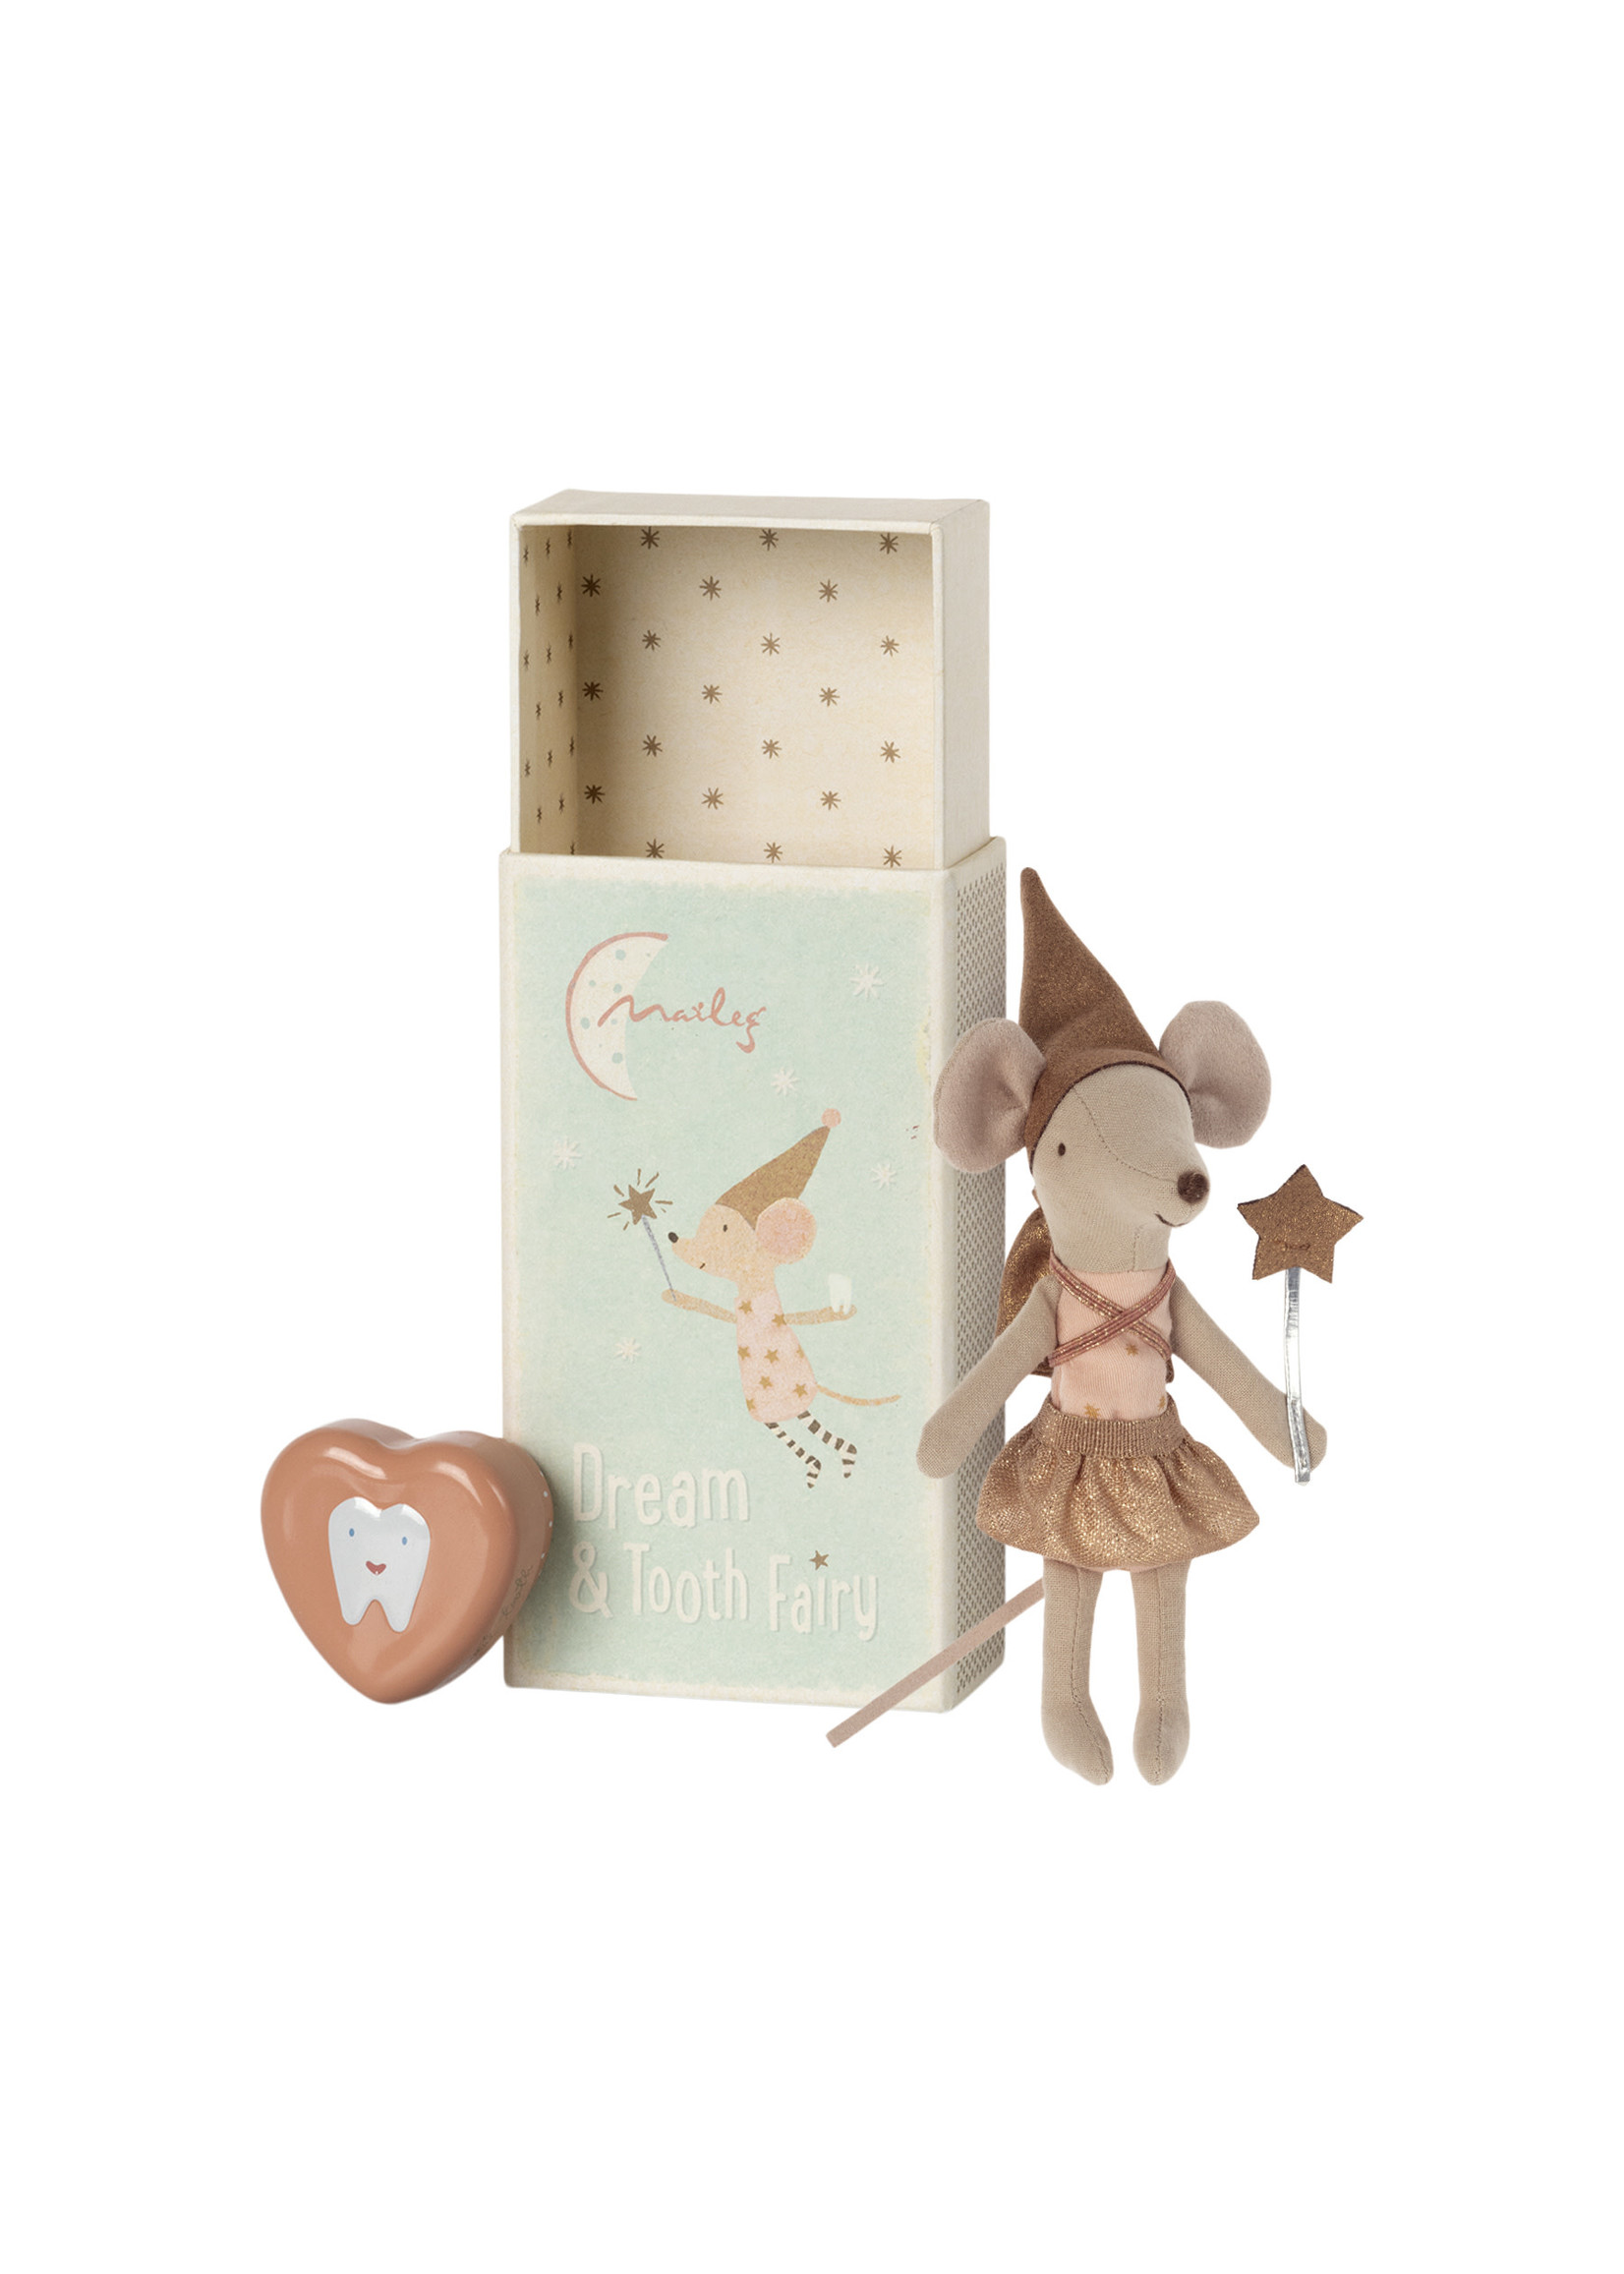 Maileg Big Sister Mouse - Tooth Fairy in Matchbox